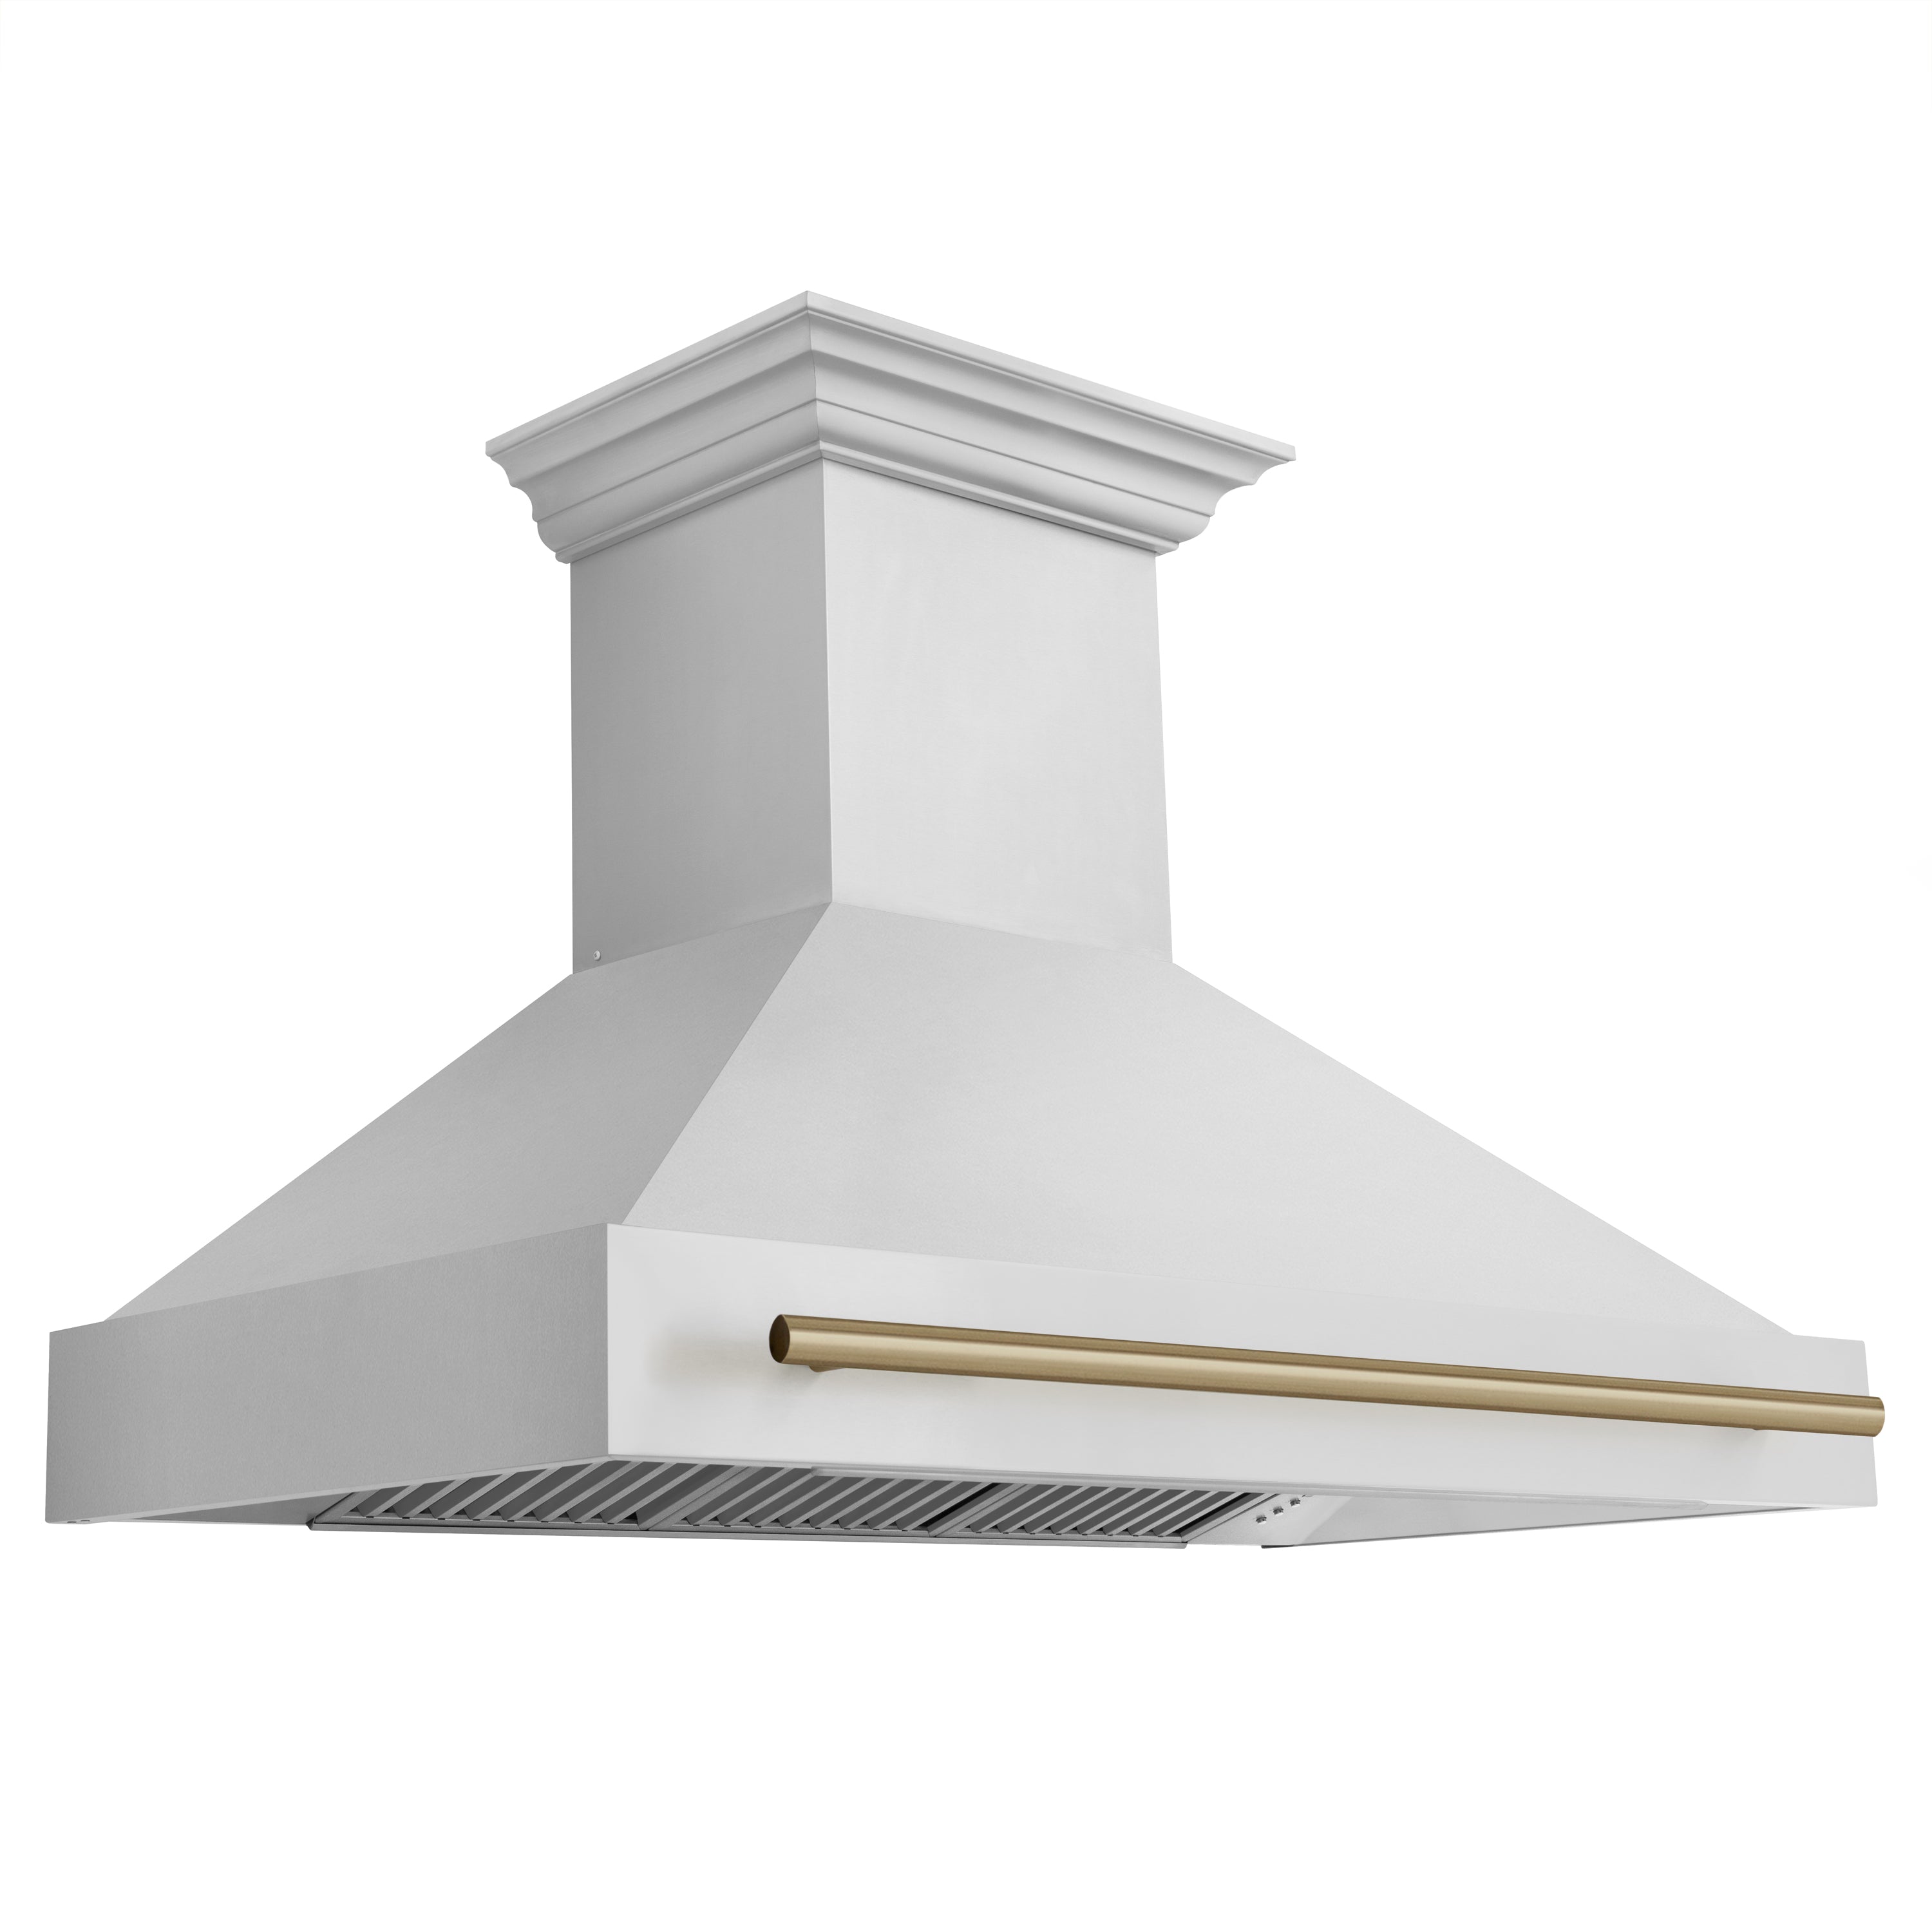 ZLINE Autograph Edition 48" Wall Mount Range Hood with Champagne Bronze accent handle side.